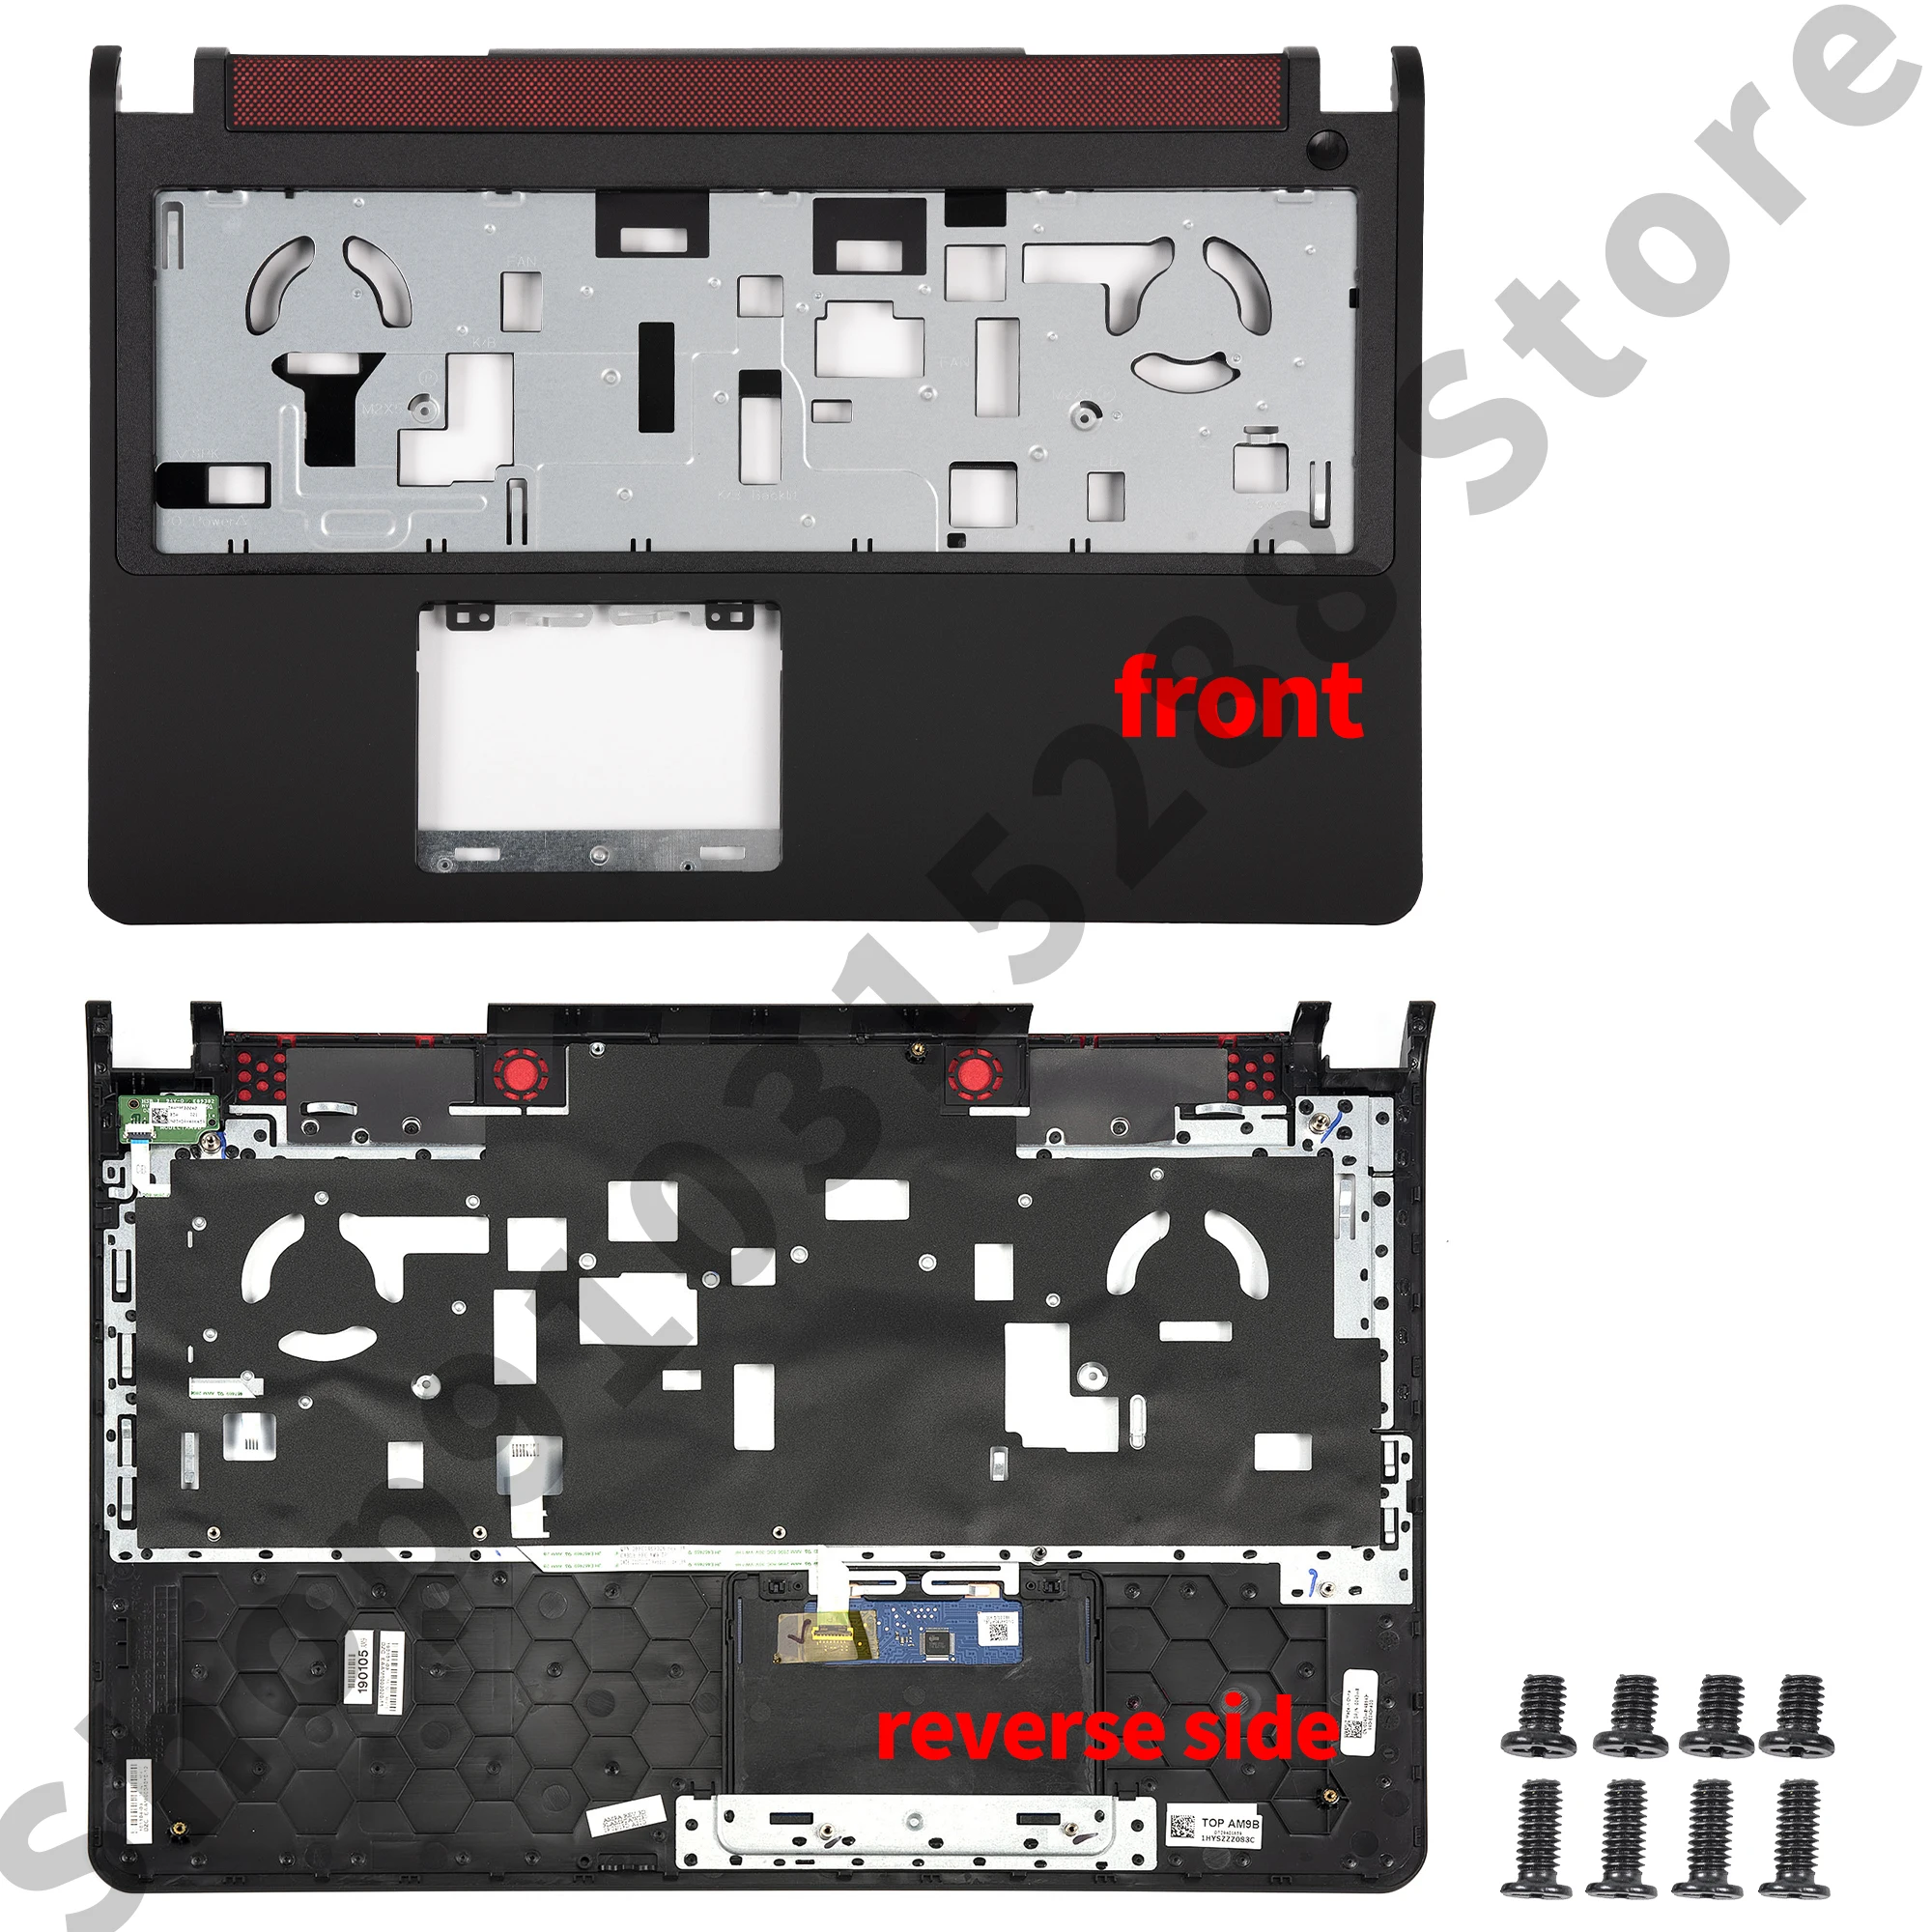 New LCD Back Cover For Dell Inspiron 15 7000 7557 7559 7557 P57F 01D0WN Bottom Case Palmrest Hinges Laptop Repair Parts